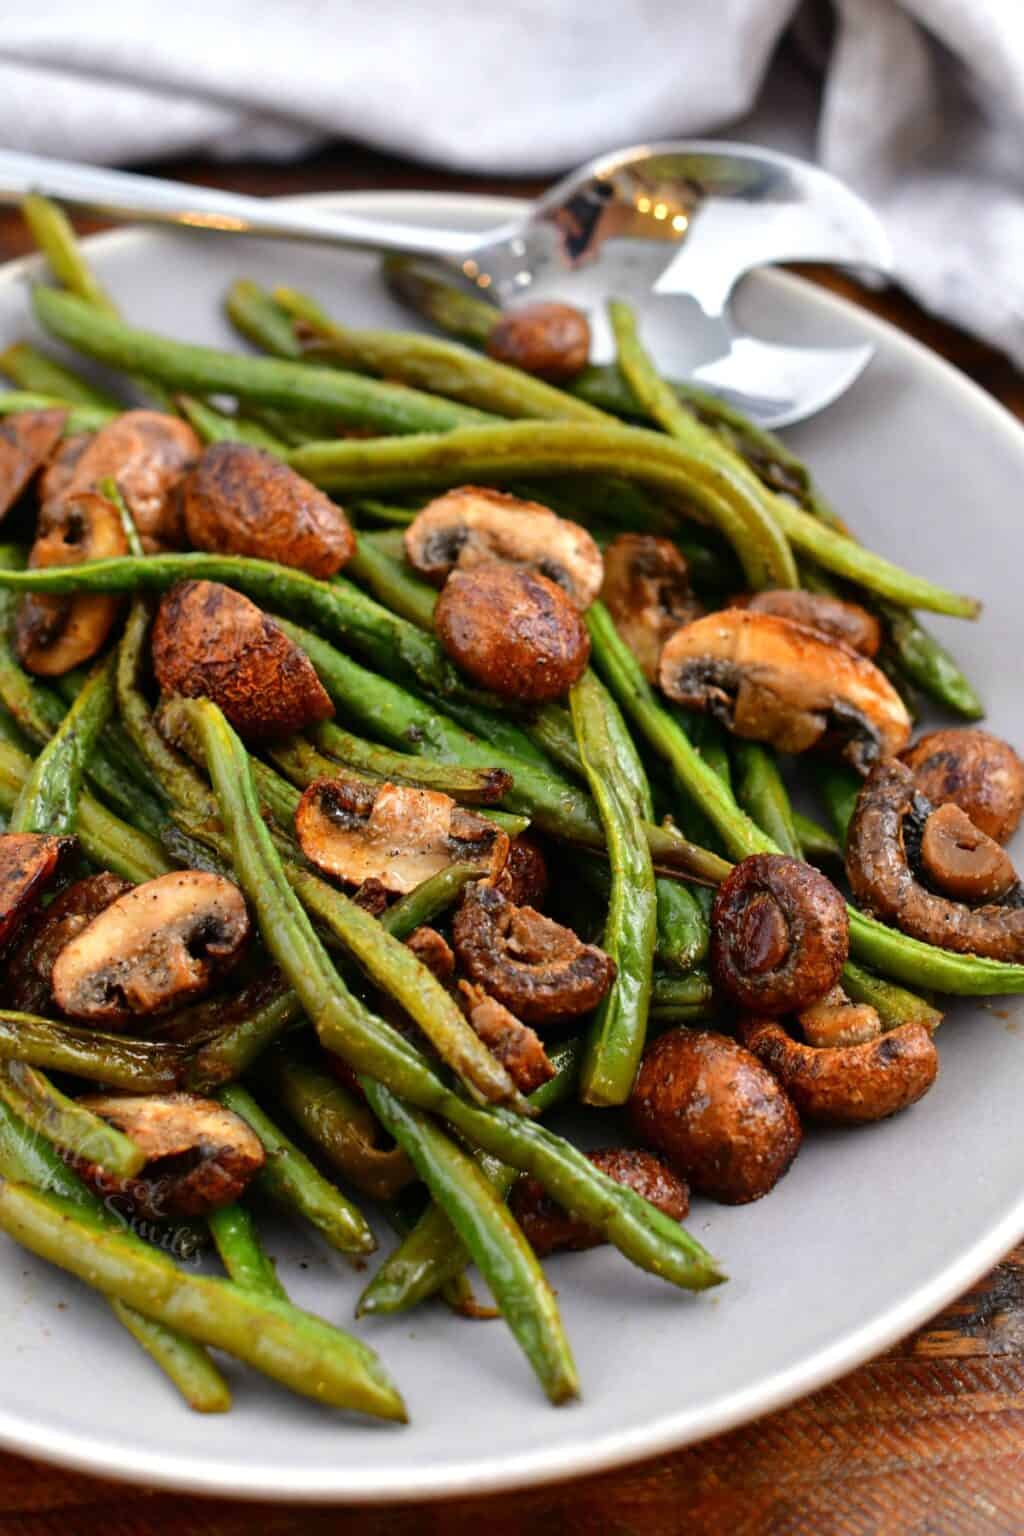 Roasted Green Beans and Mushrooms - Easy and Healthy Vegetable Side